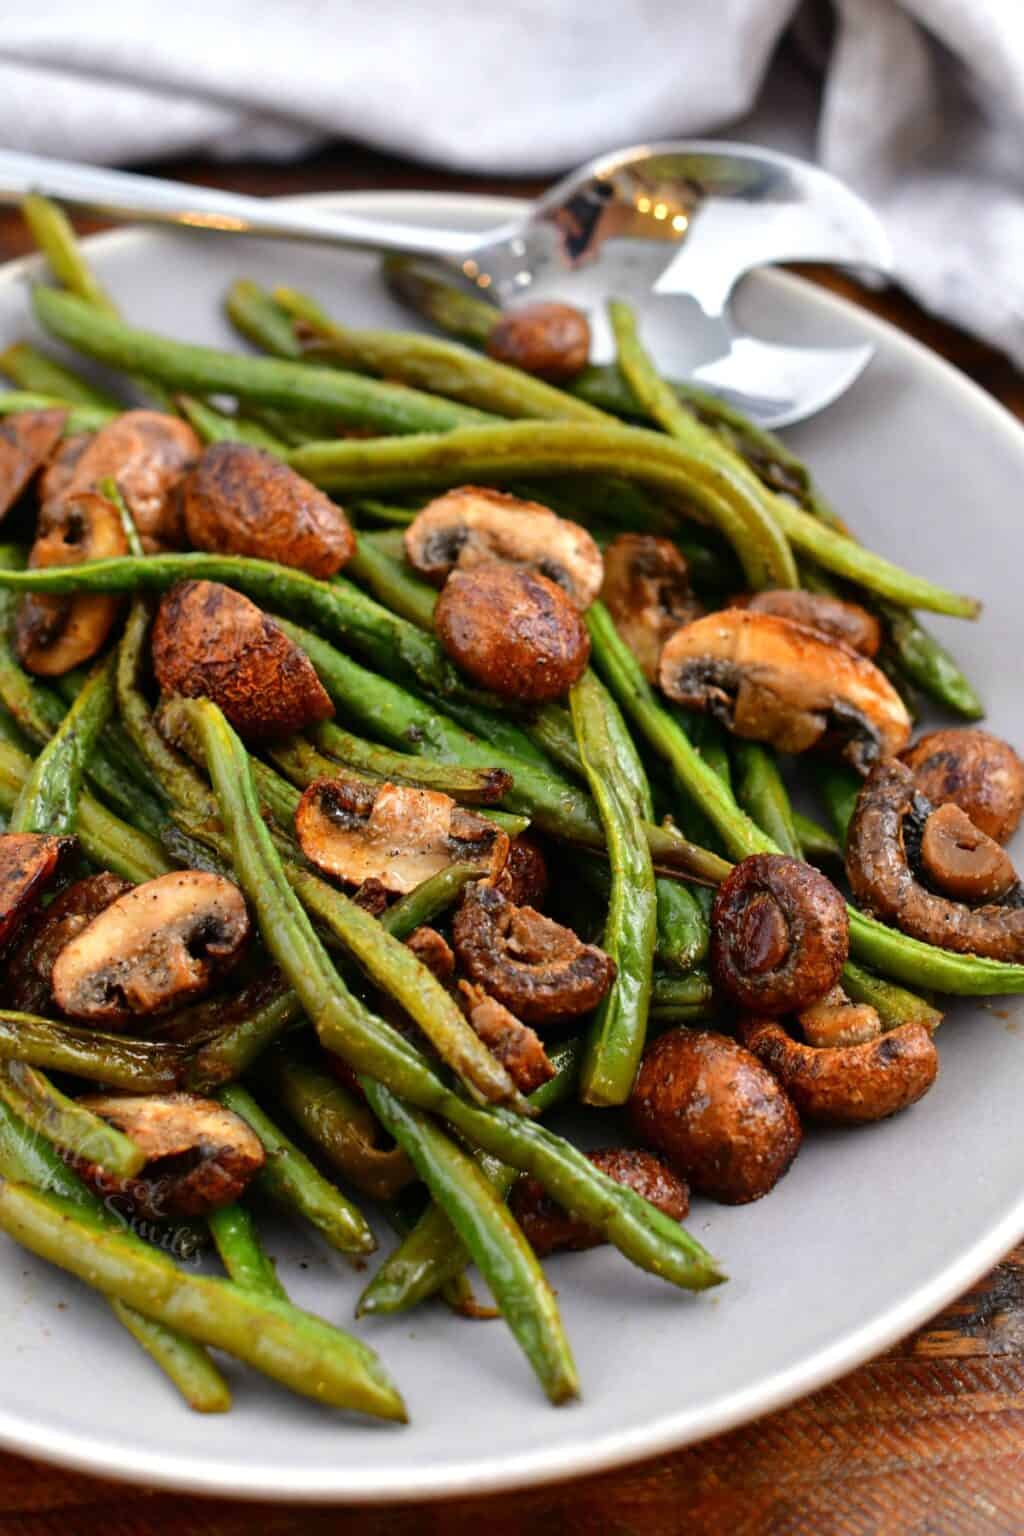 Roasted Green Beans and Mushrooms - Easy and Healthy Vegetable Side